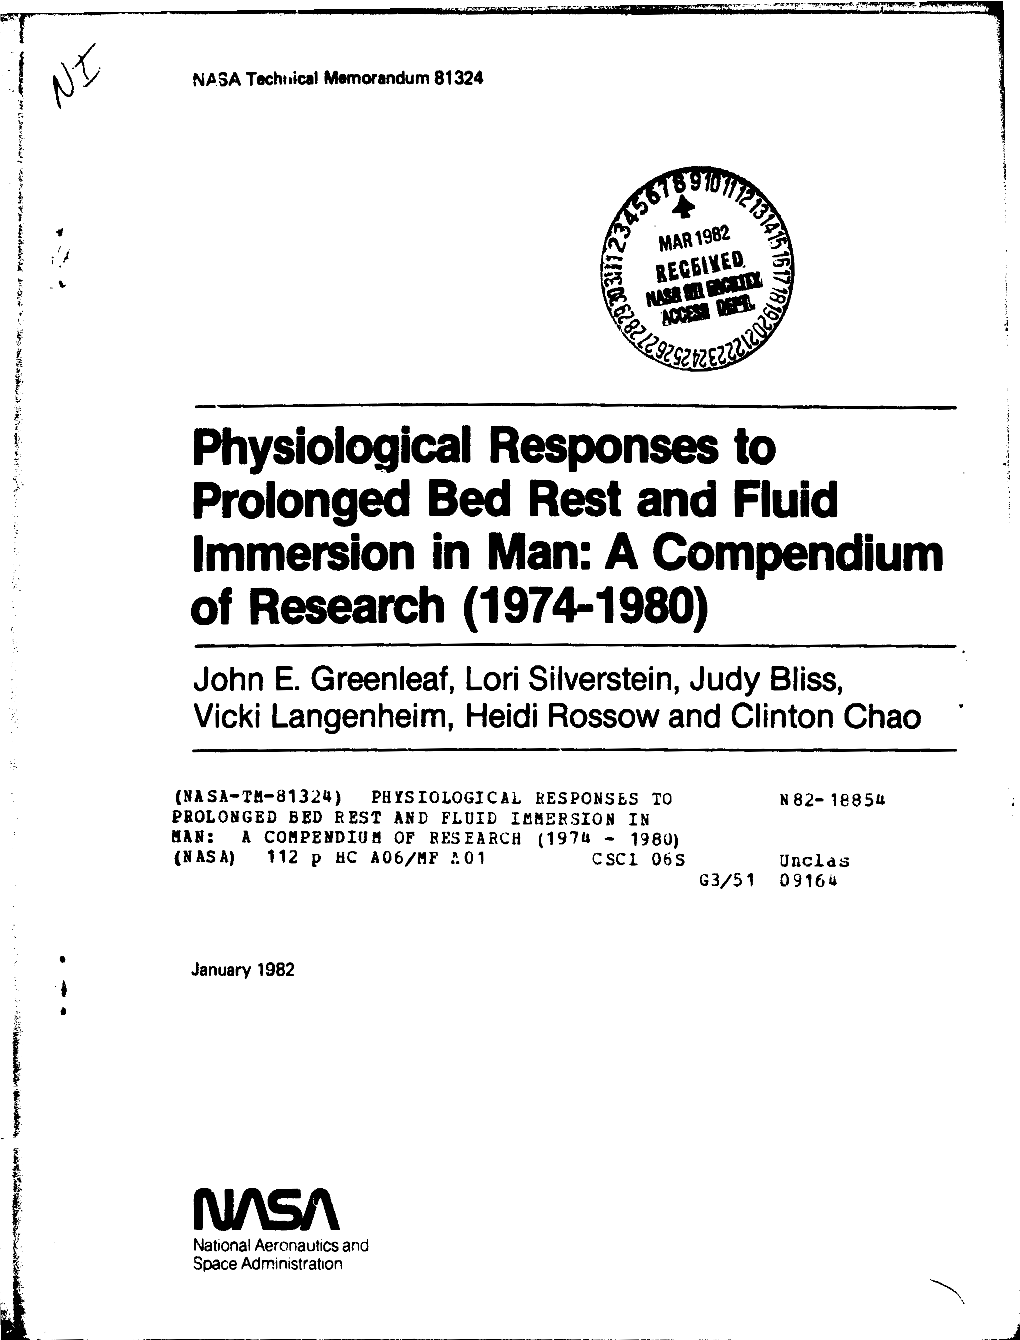 Physiological Responses to Prolonged Bed Rest and Fluid